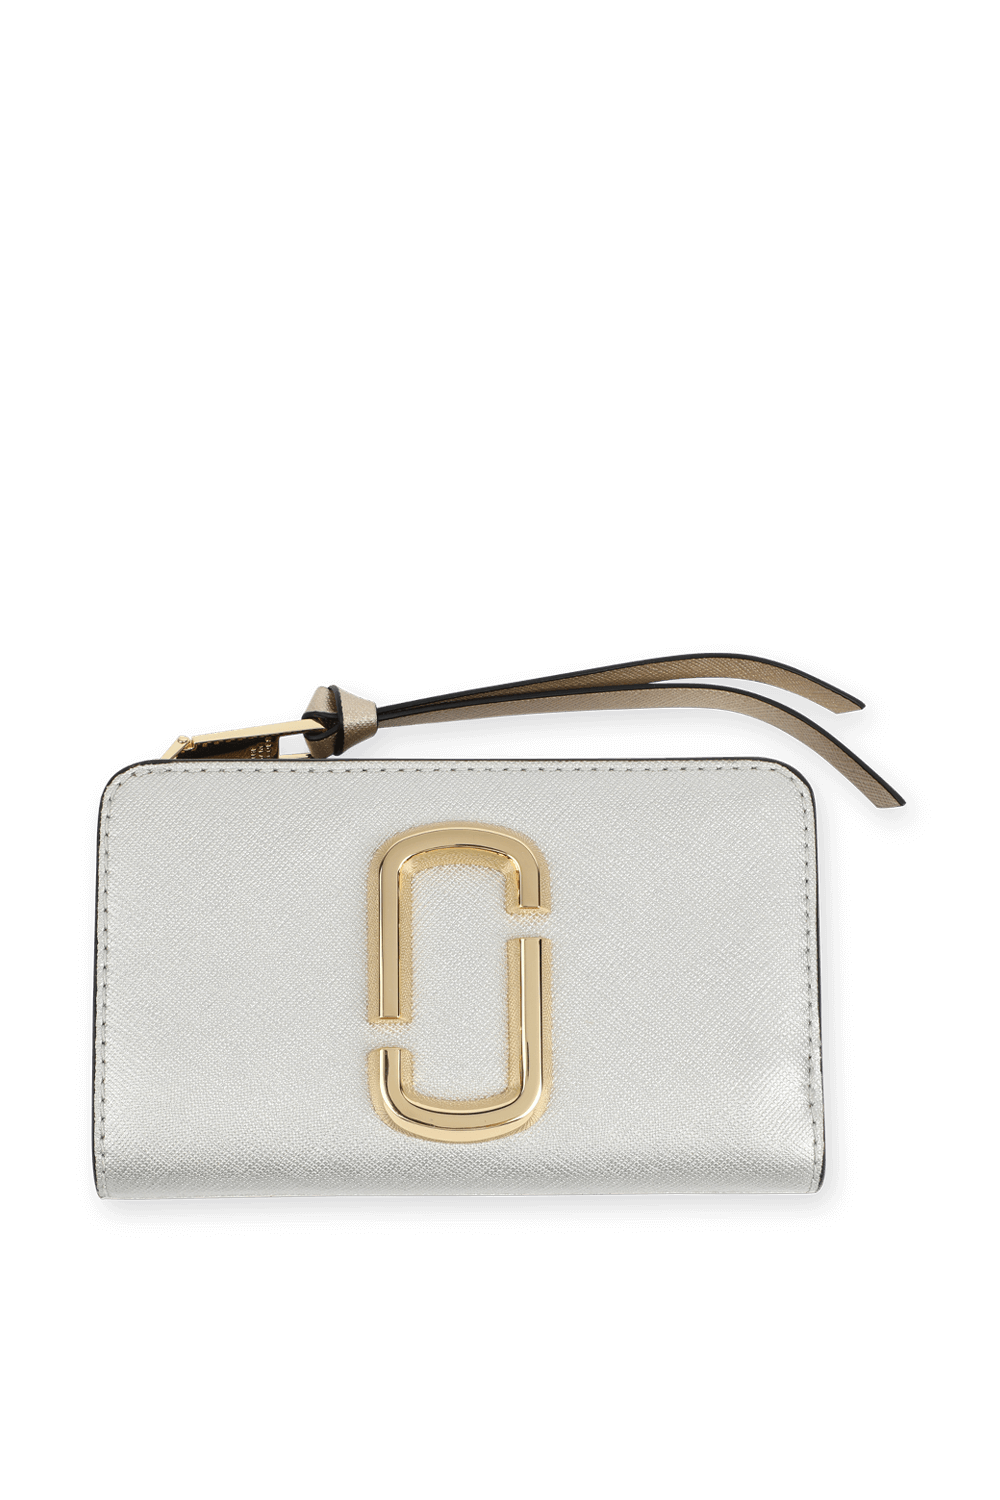 The Snapshot Compact Wallet in Platinum MARC JACOBS